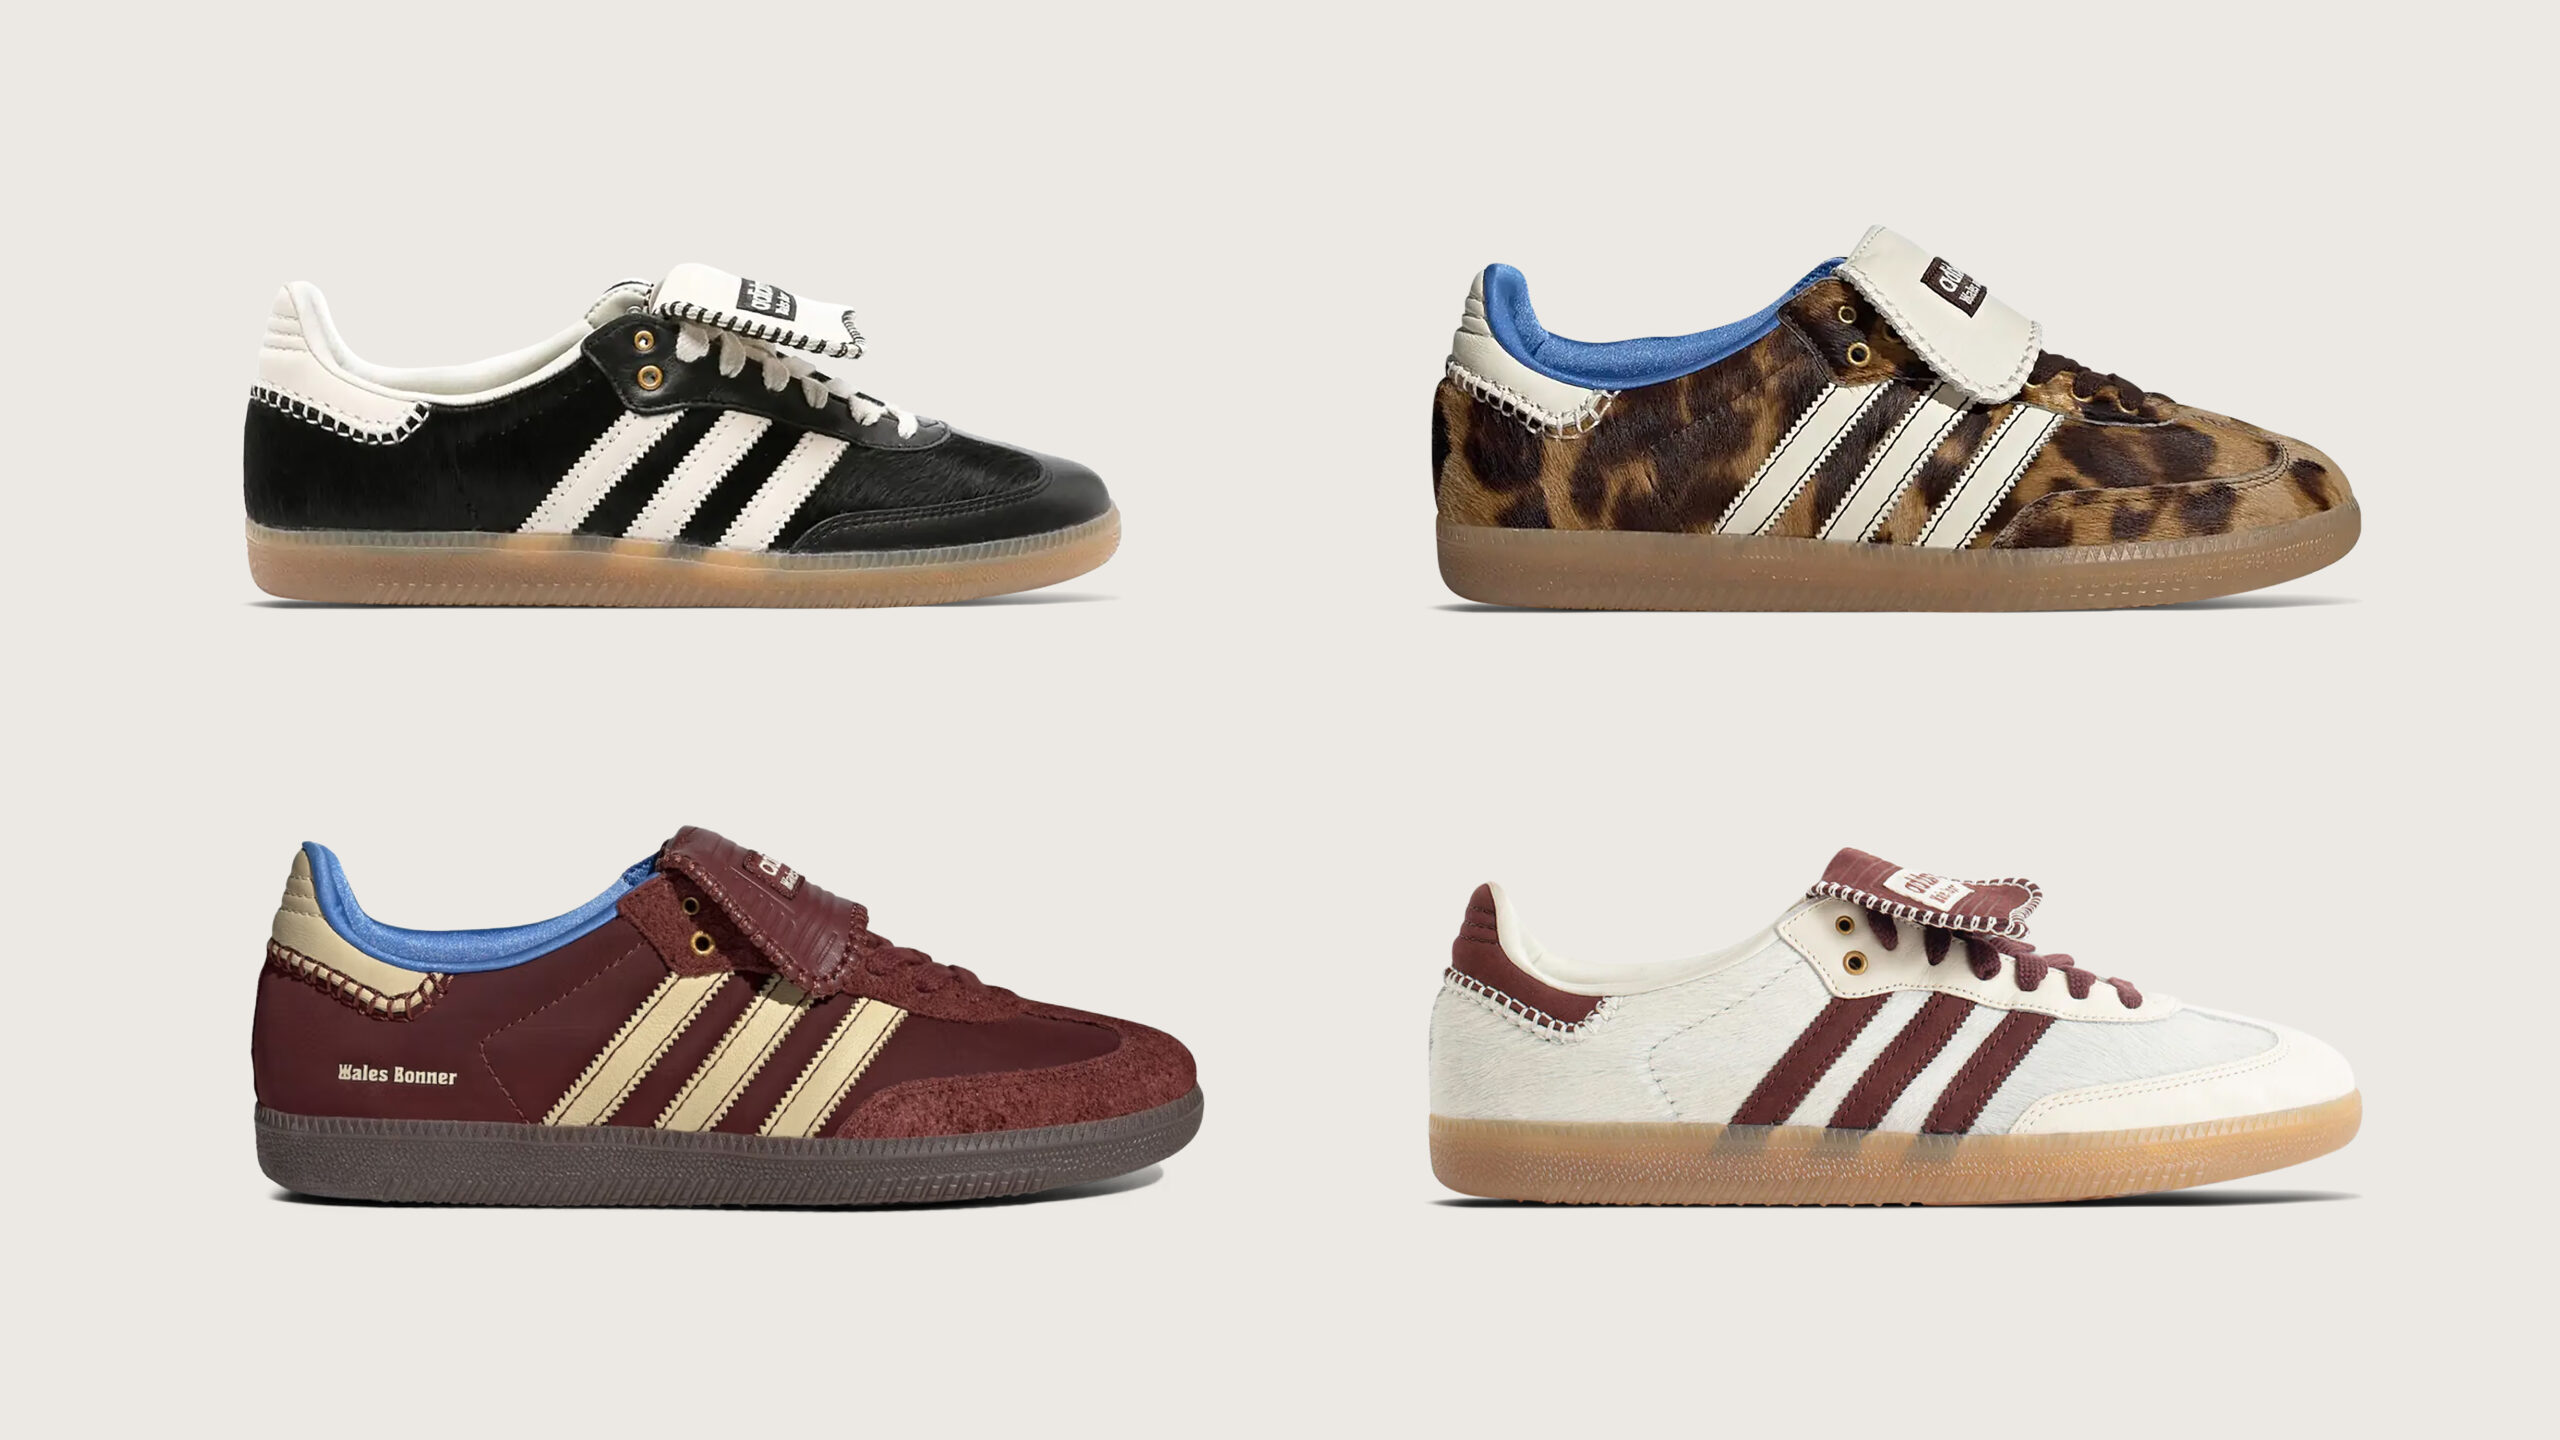 Adidas and Wales Bonner Release Four New Sambas